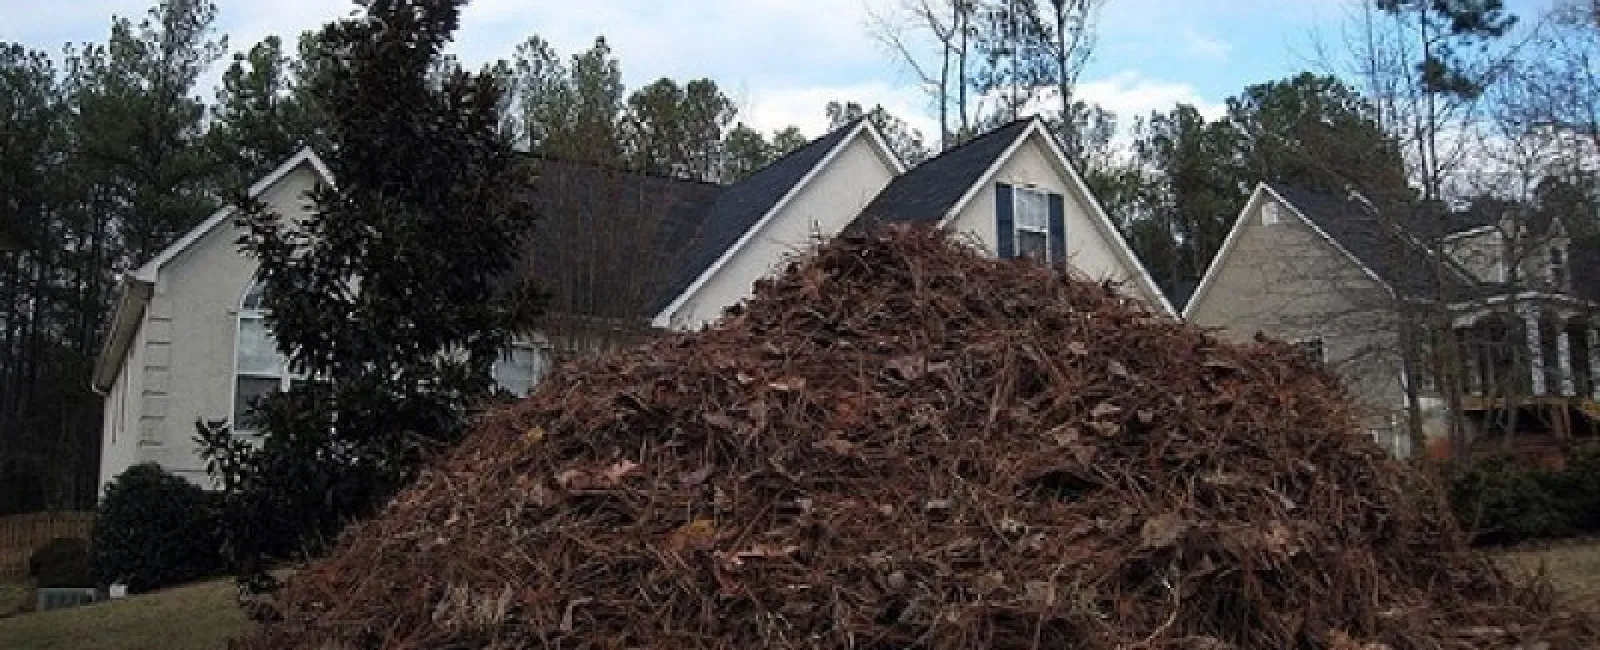 How Can Pine Straw Damage Your Roof? Here’s What You Should Know.